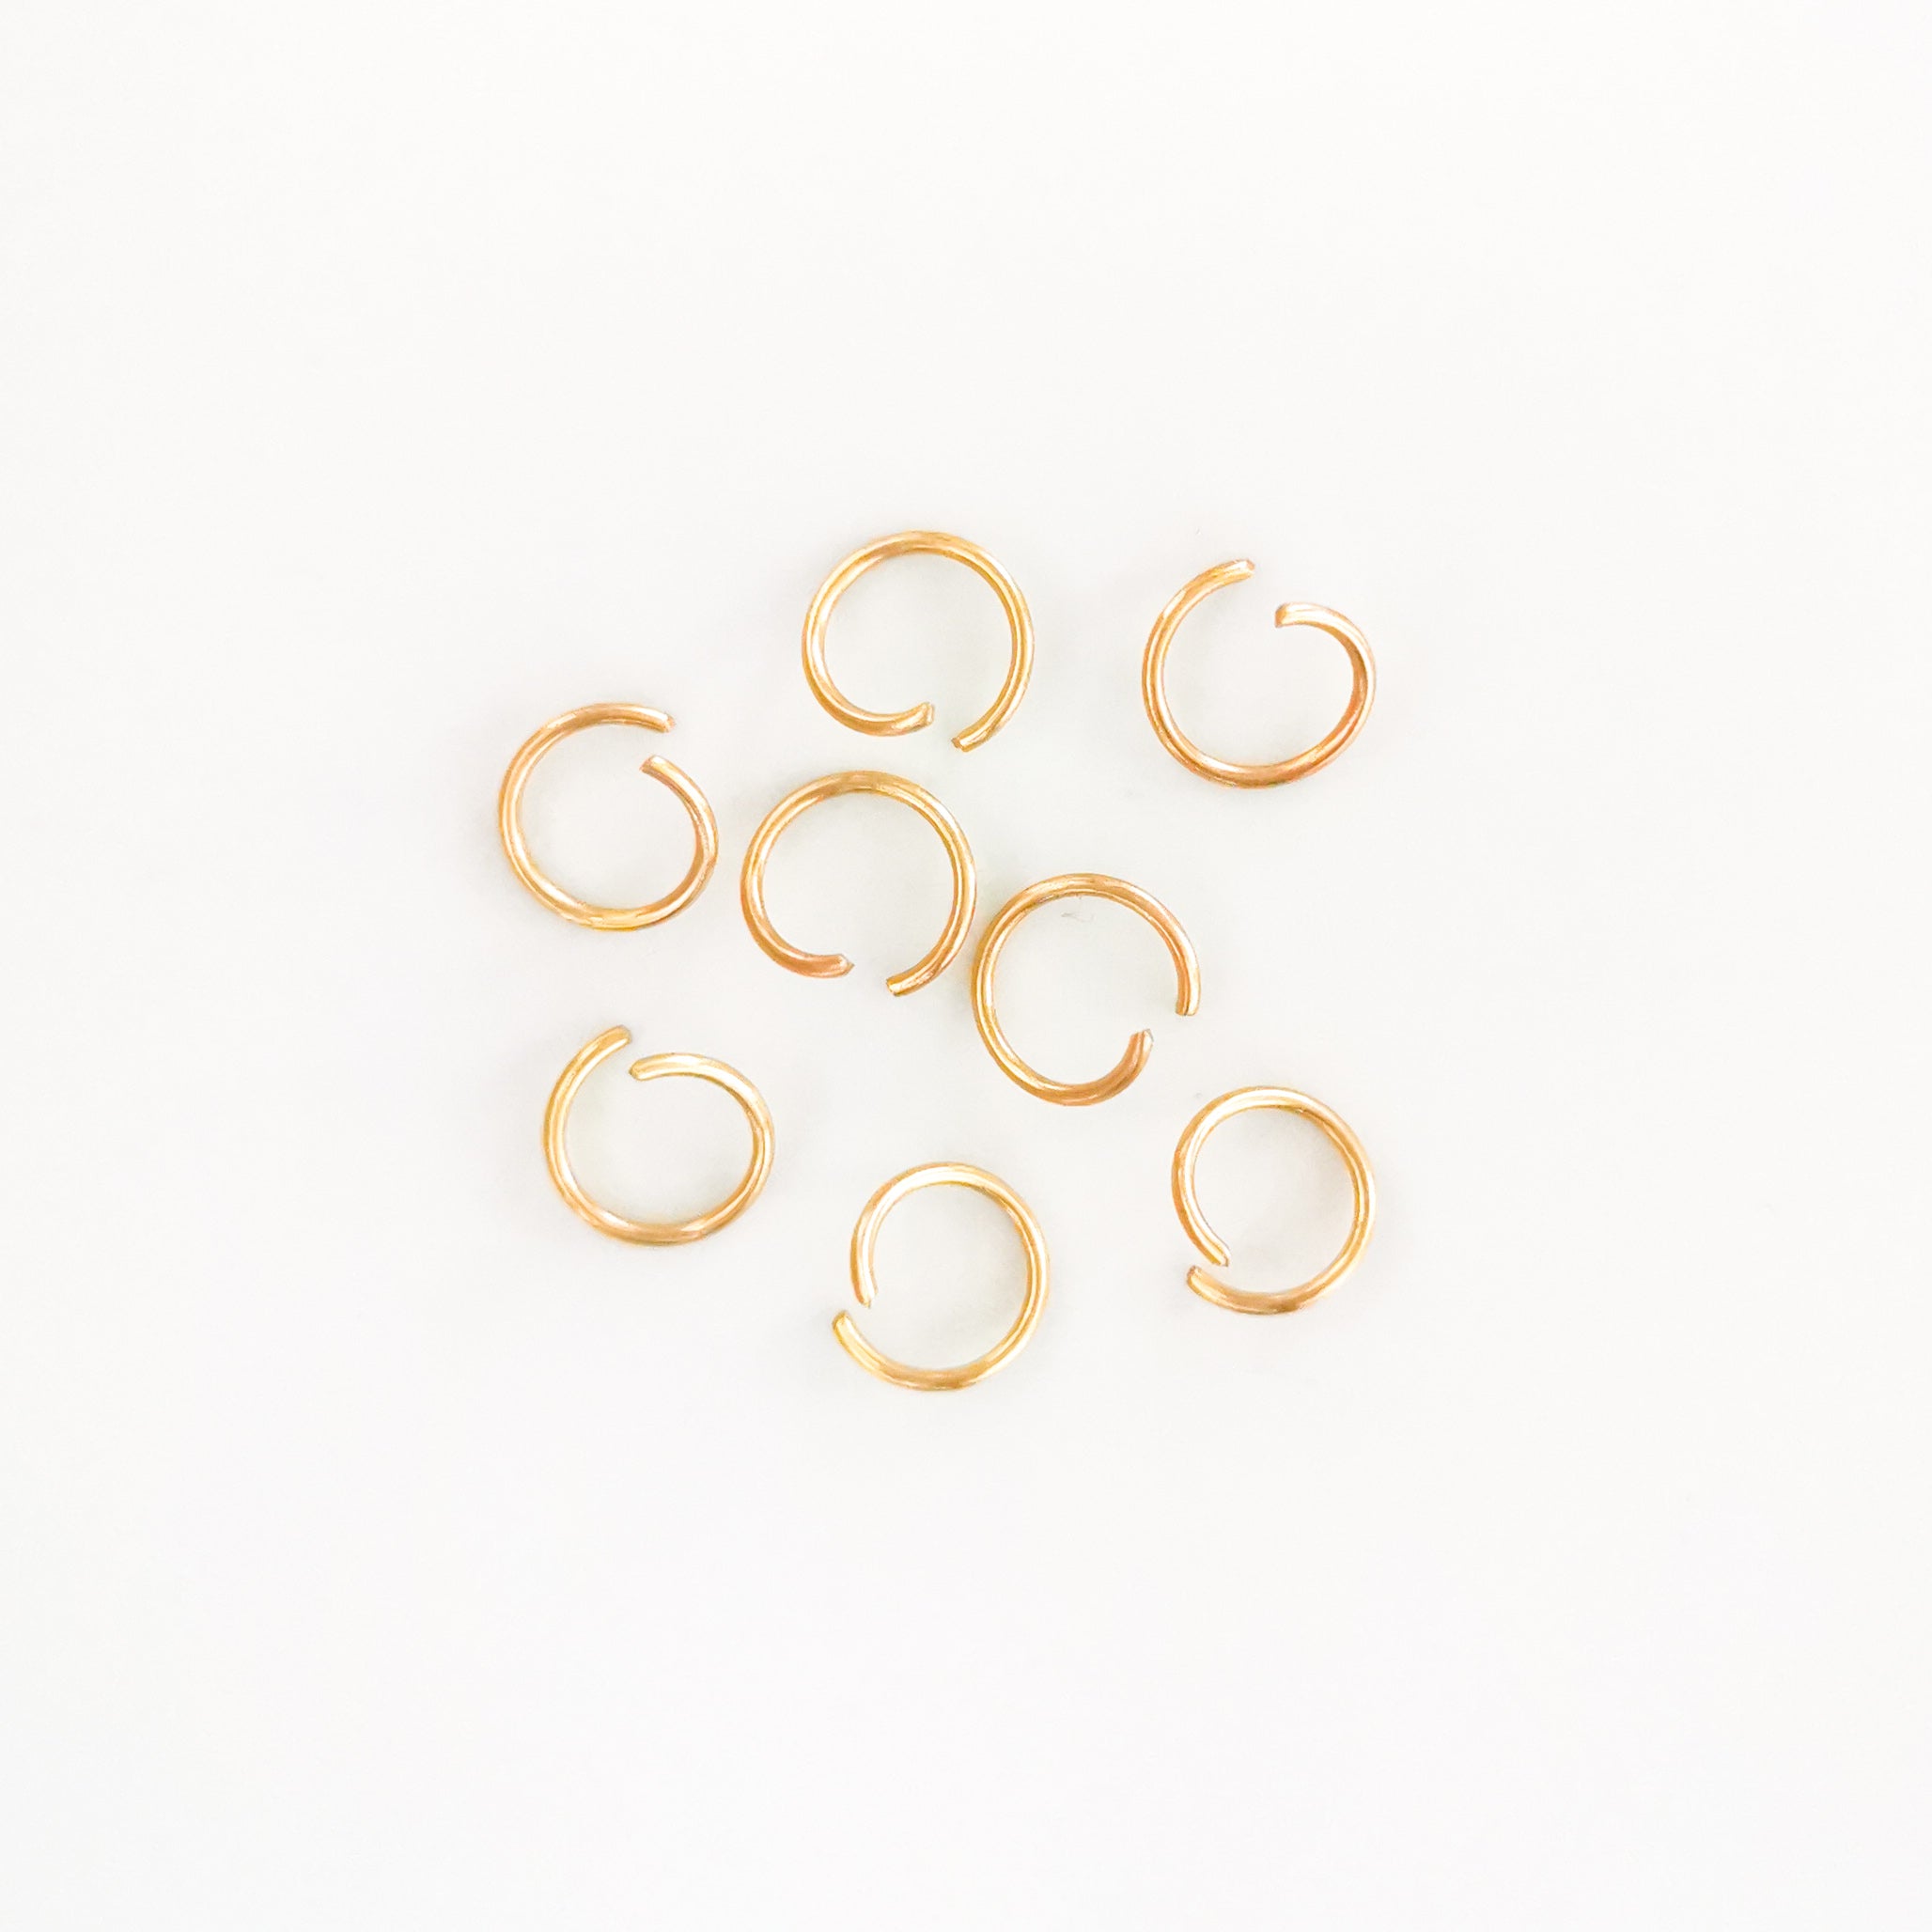 10mm Gold Stainless Steel Jump Rings - 100 pieces